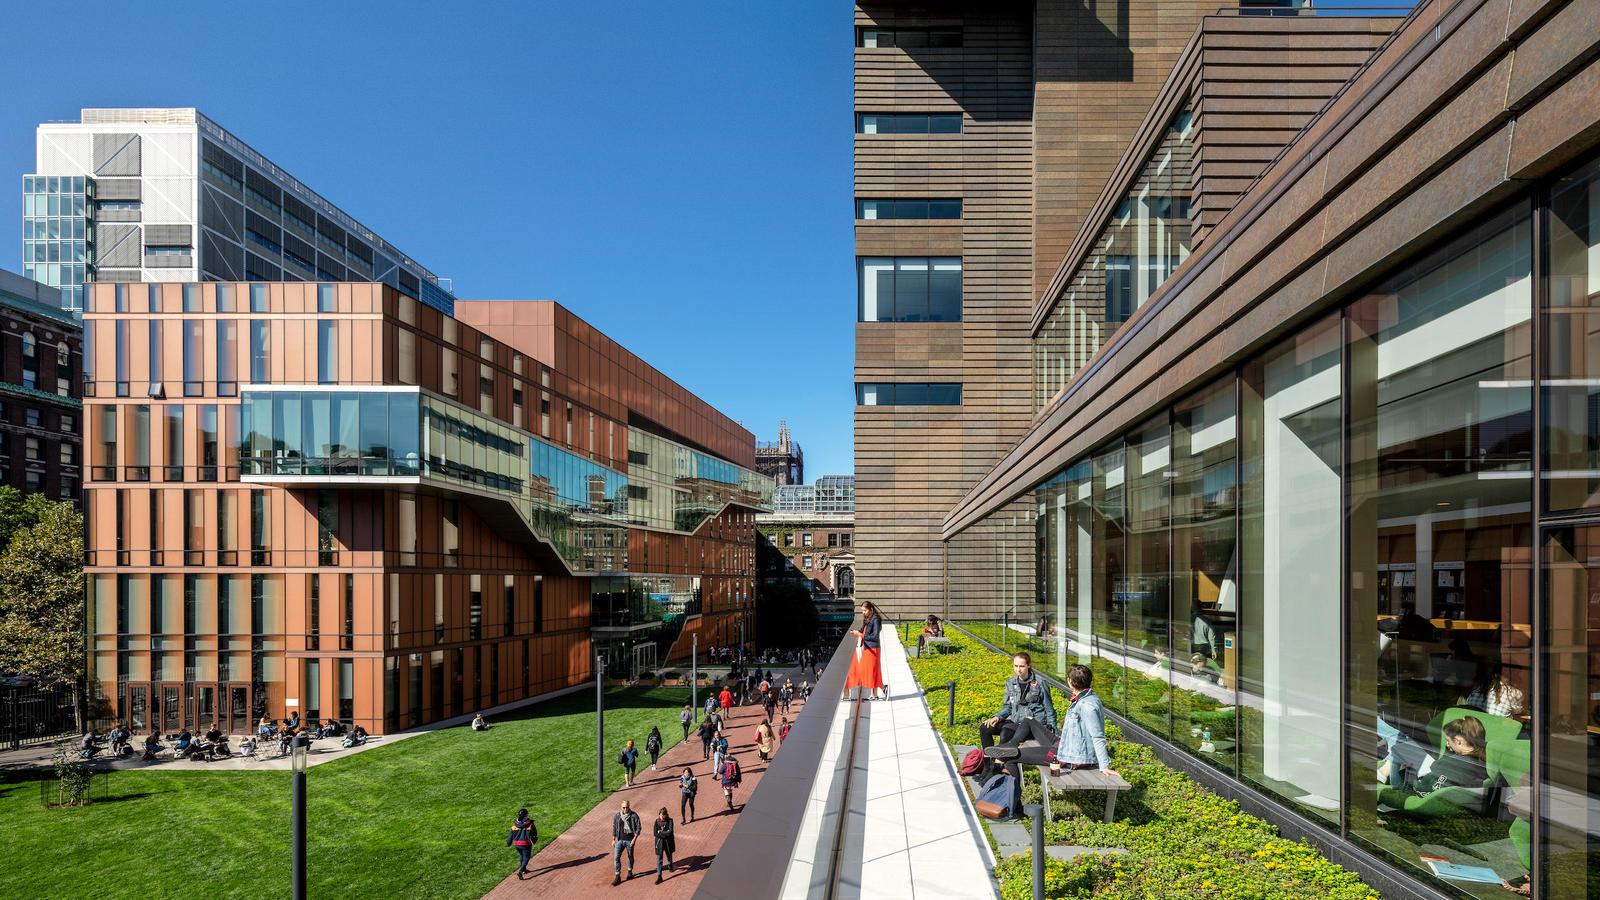 A view of Barnard's campus with students on Milstein's terrace, students walking on the sidewalk, and the Diana Center in the distance